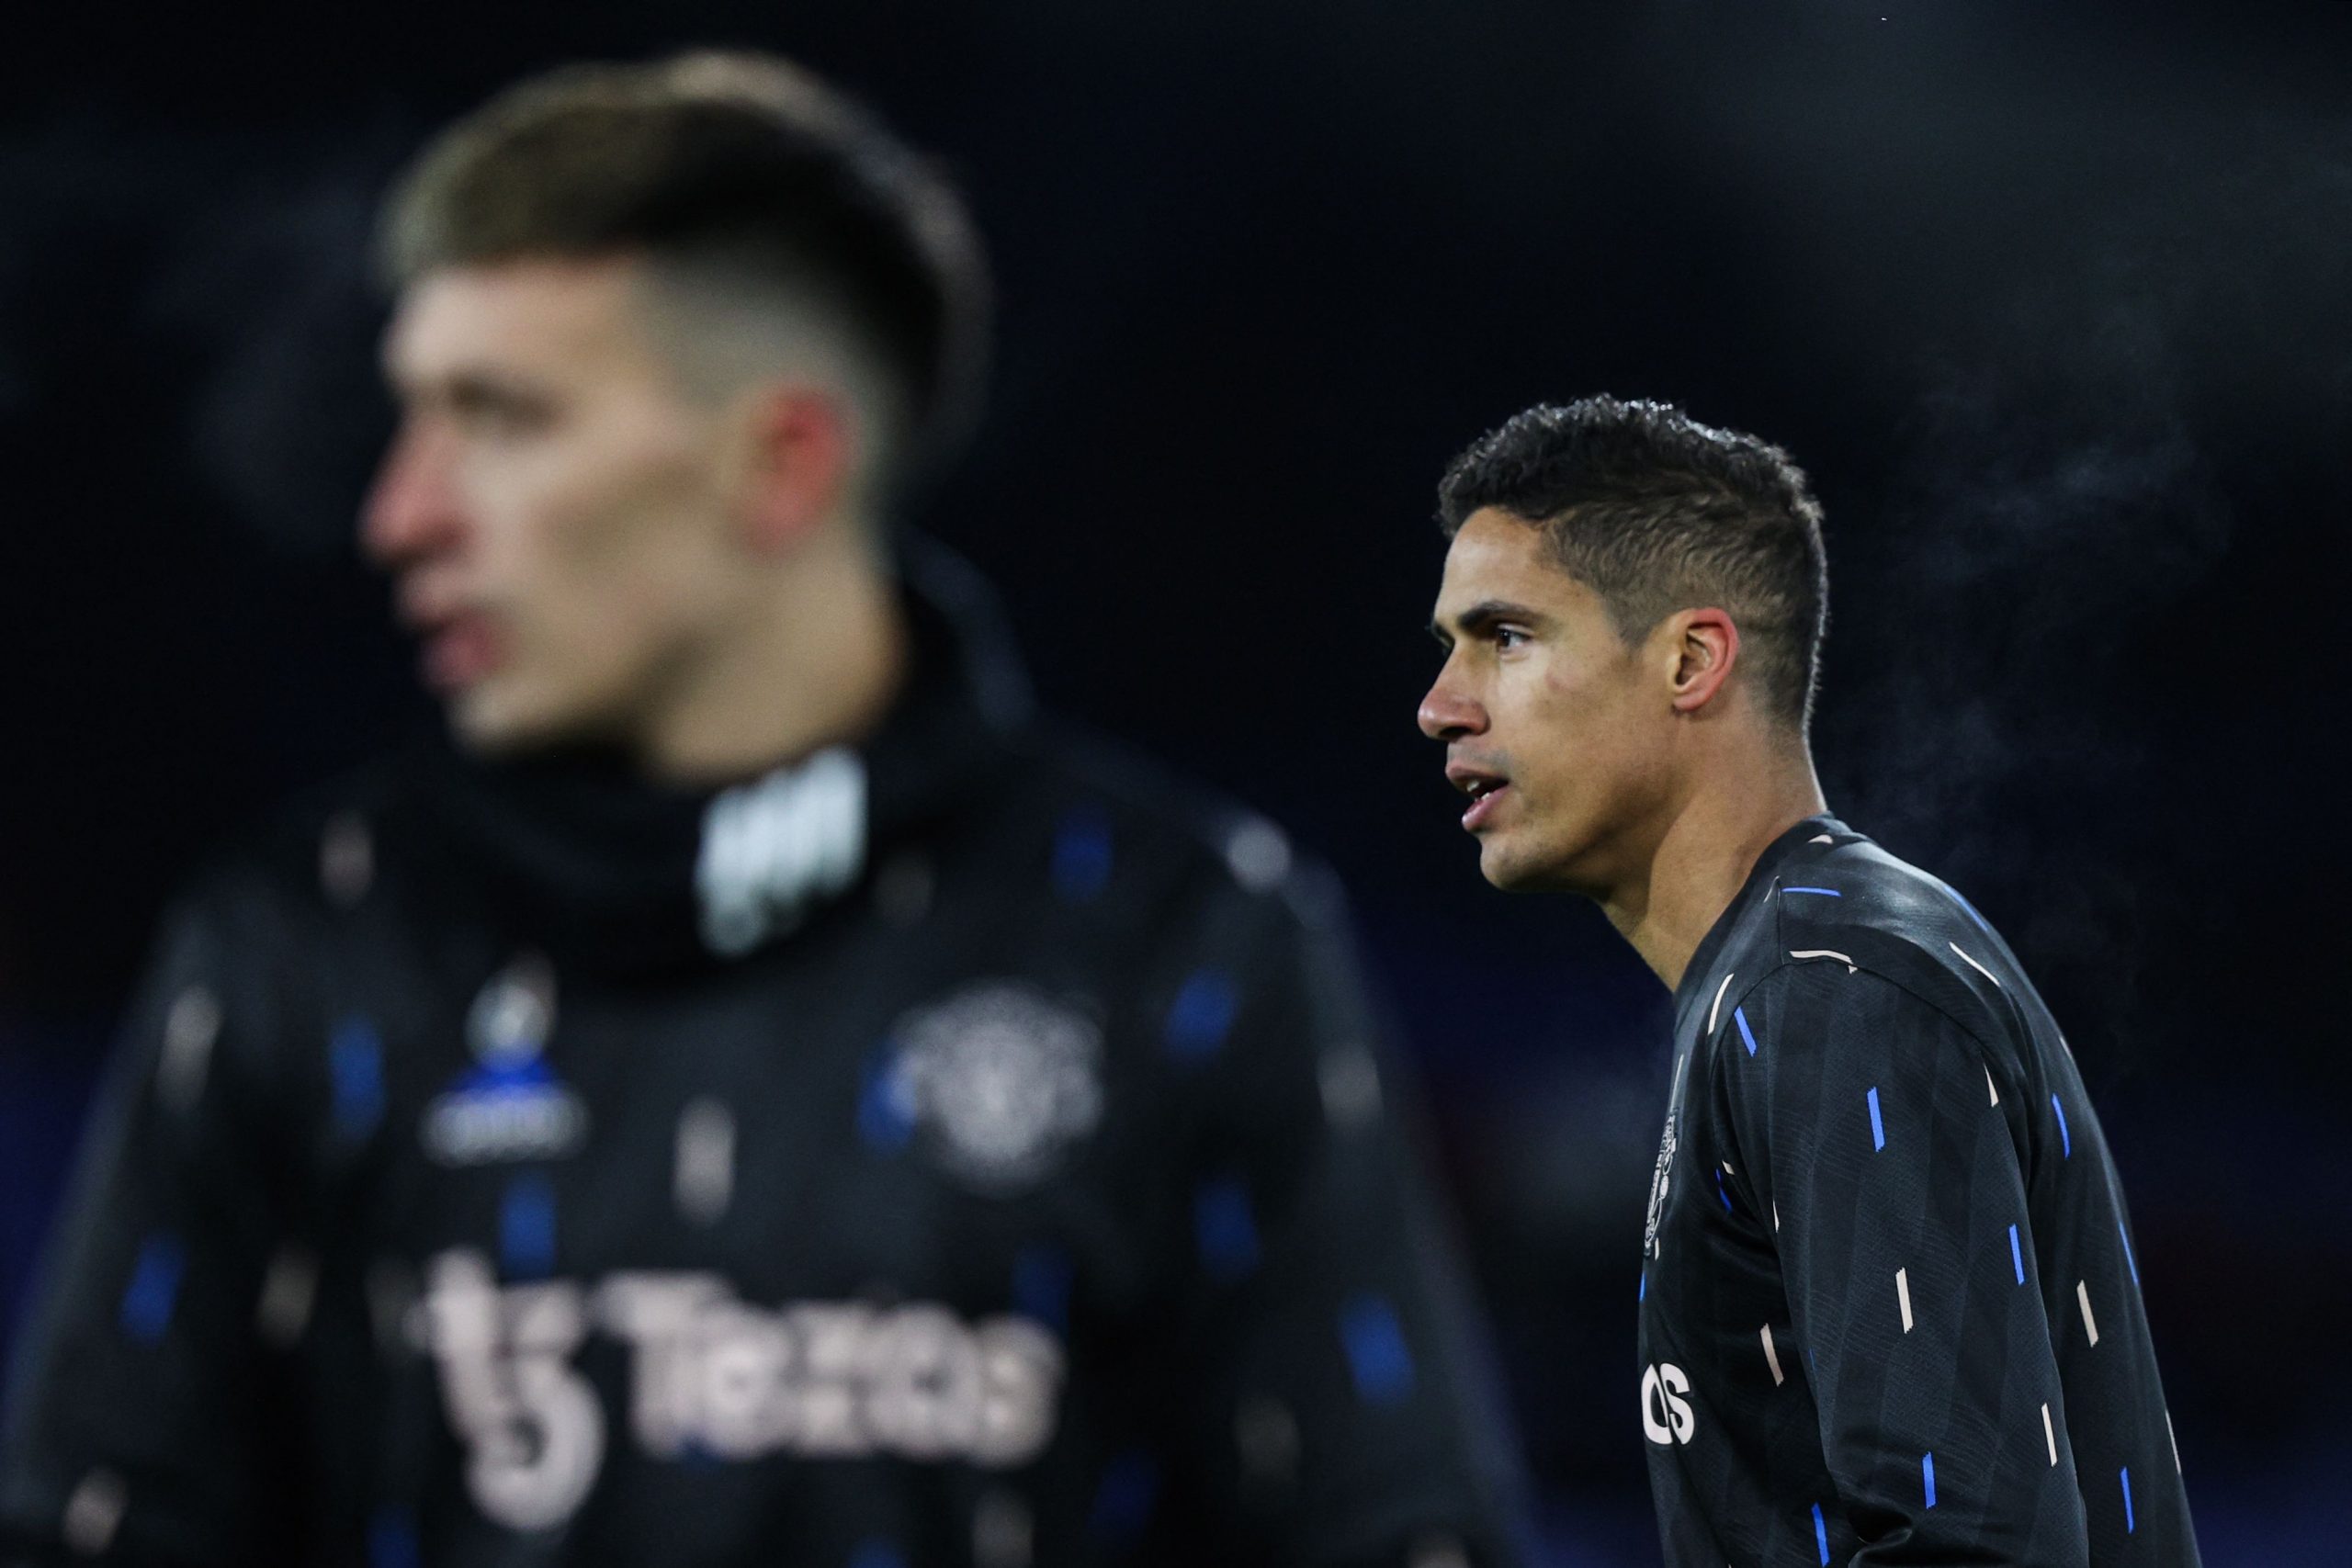 Manchester United's Raphael Varane and Lisandro Martinez warm up prior to the English Premier League football match between Crystal Palace and Manchester United at Selhurst Park in south London on January 18, 2023.